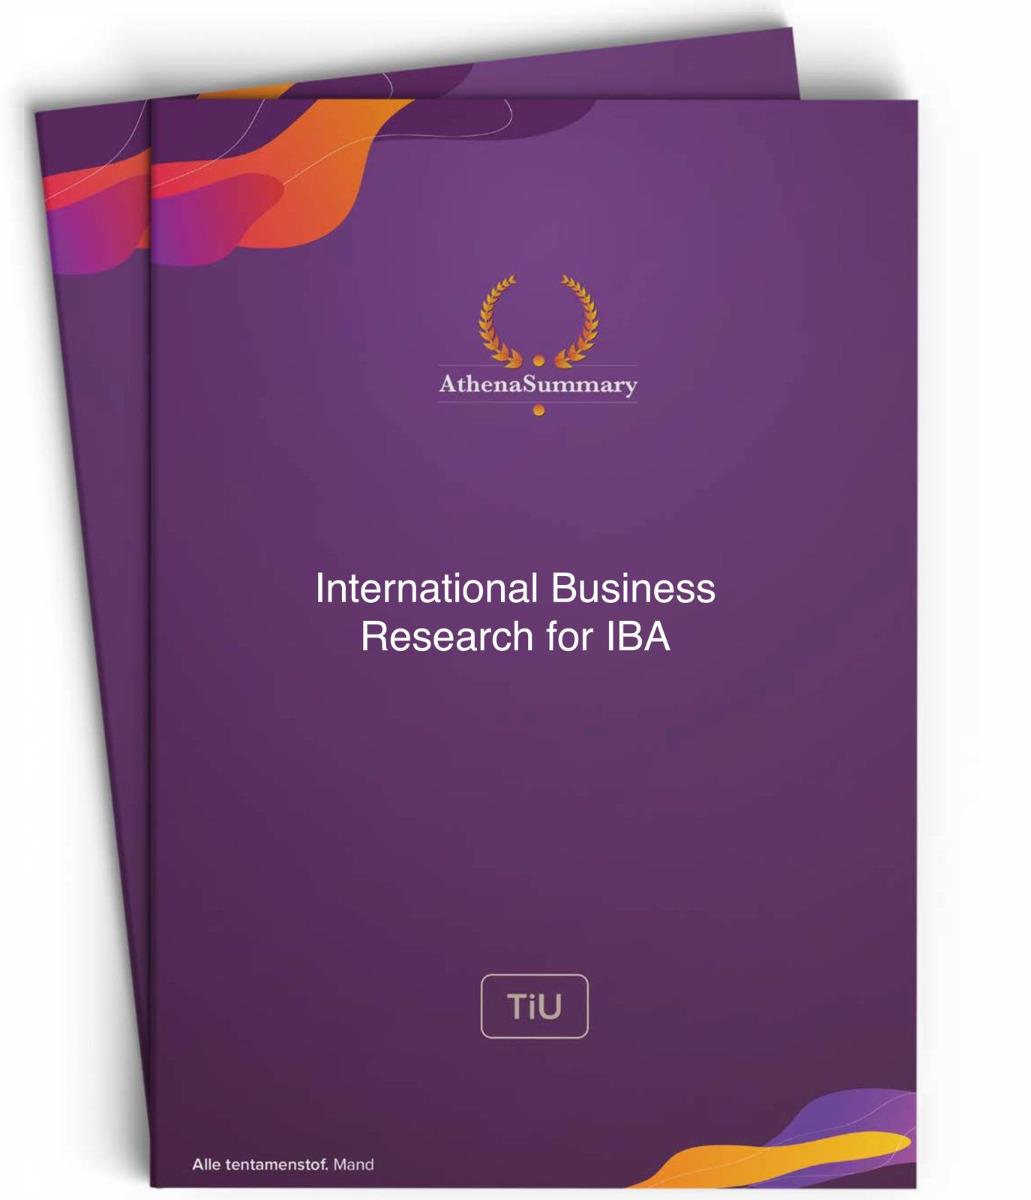 Literature and Lecture Summary: International Business Research for IBA